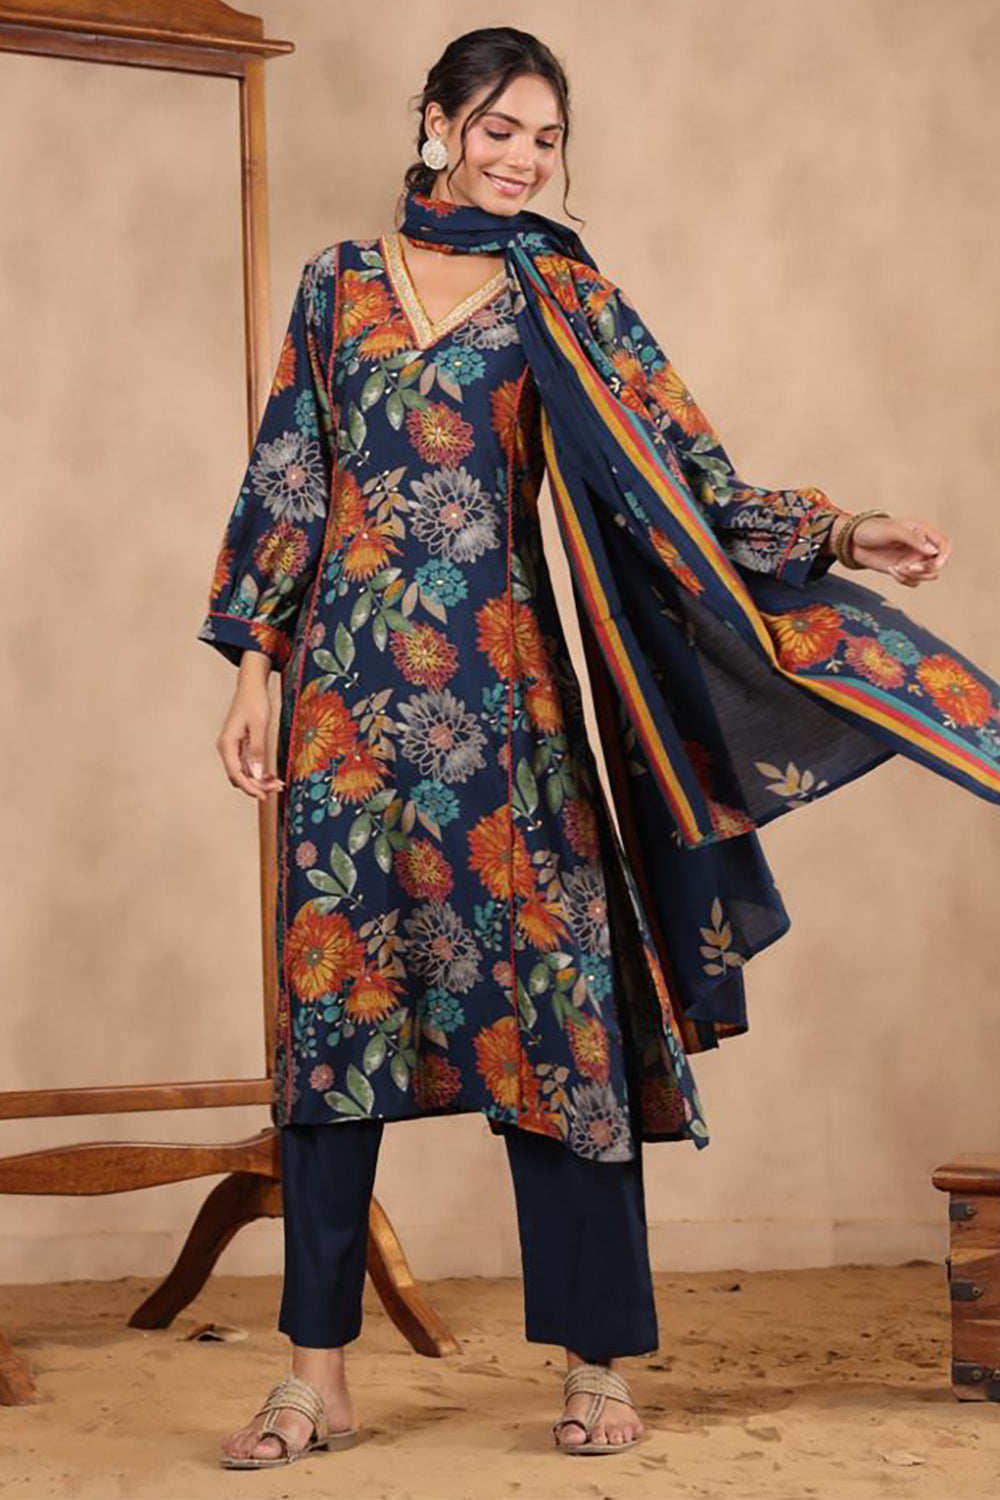 Navy Blue Color Muslin Printed Straight Suit